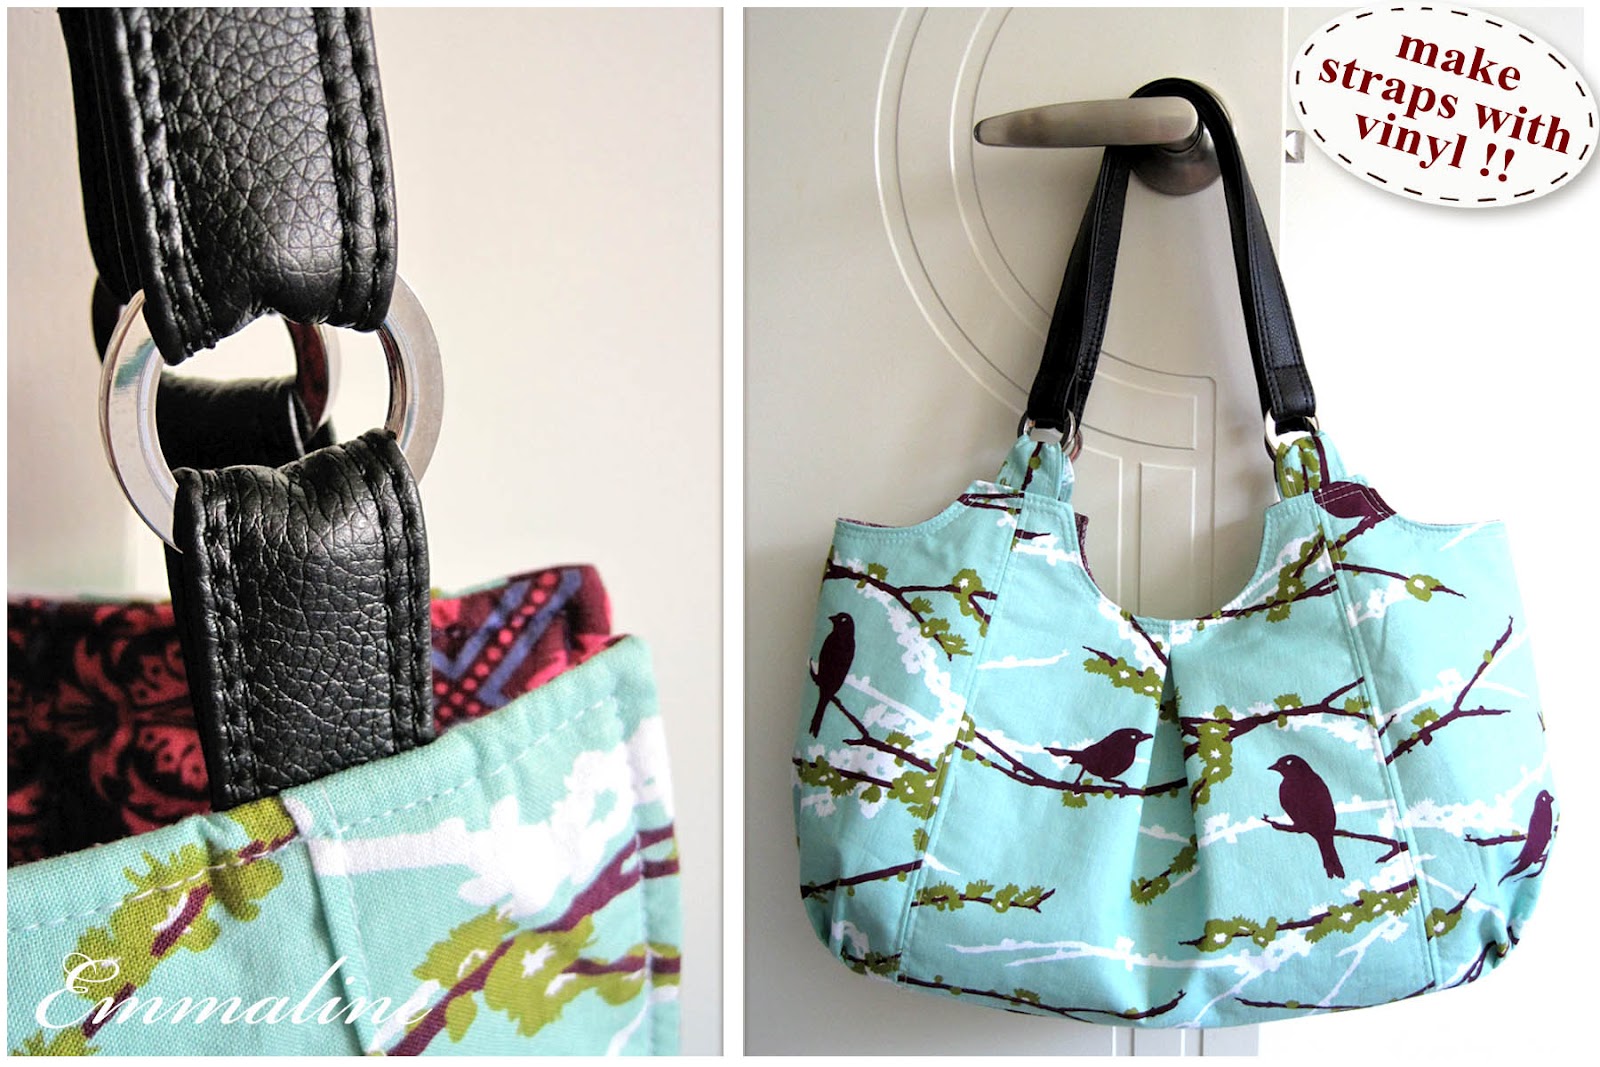 Emmaline Bags: Sewing Patterns and Purse Supplies: Make Your Own  Vinyl/Leather Look Handbag Straps - A Tutorial